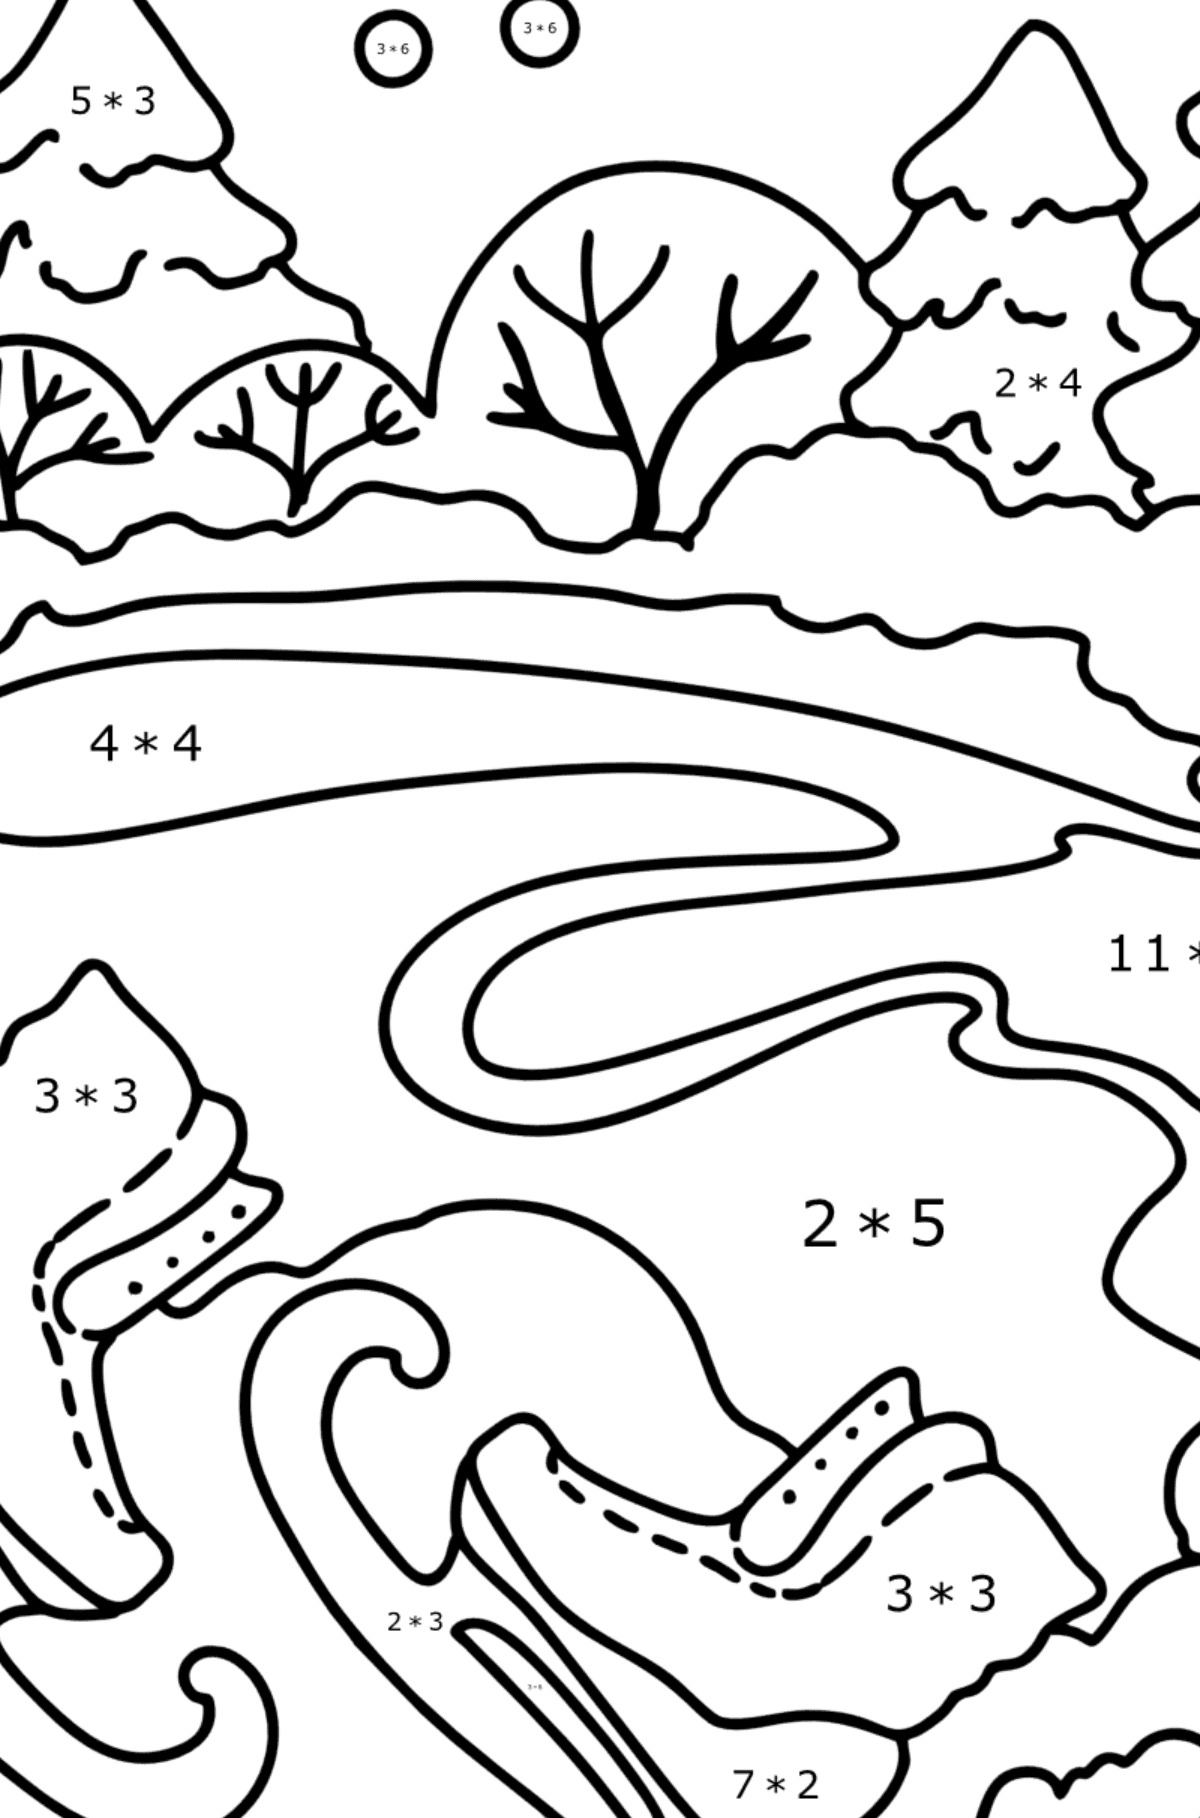 Coloring page - Winter and skates - Math Coloring - Multiplication for Kids